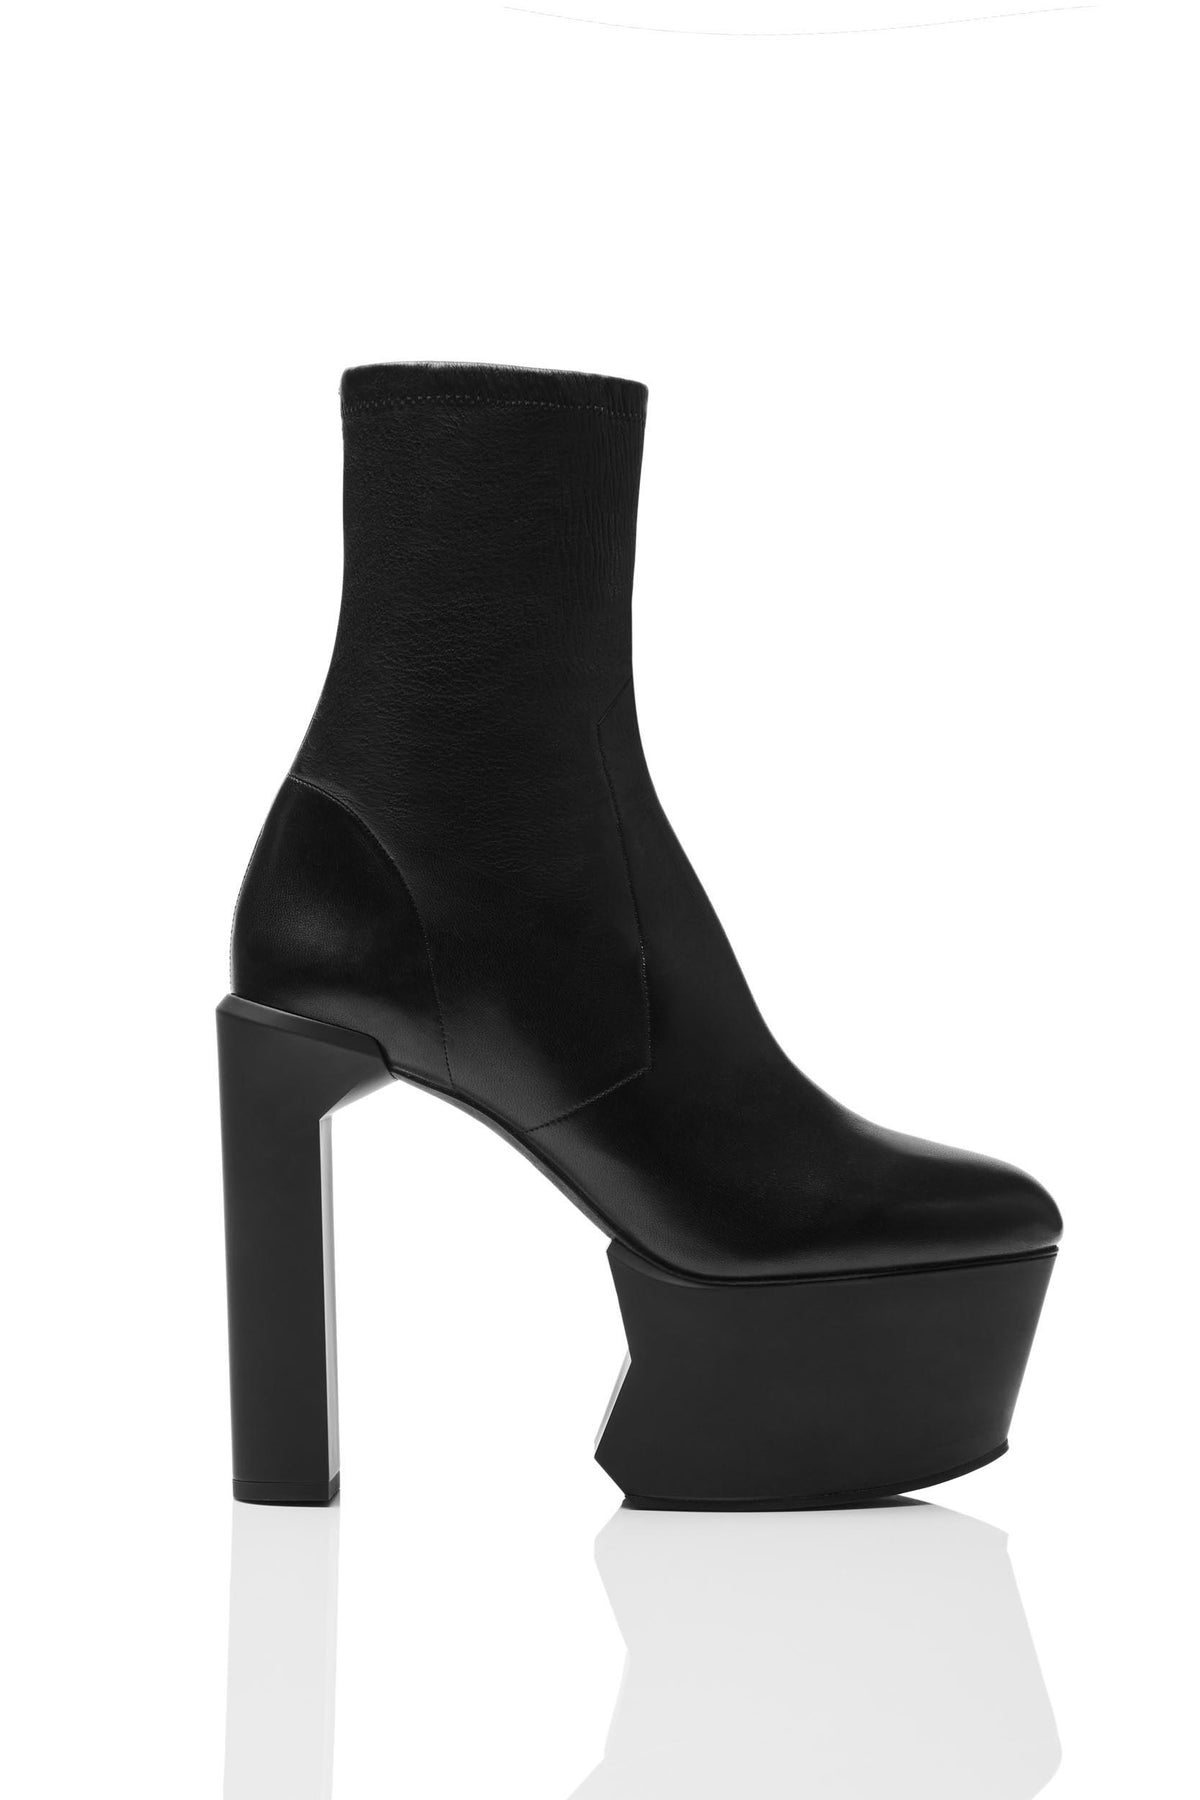 HAIKI 851 – Stretch pull-on platform boot with chic, almond shape toe. Made of Nappa leather in black. 